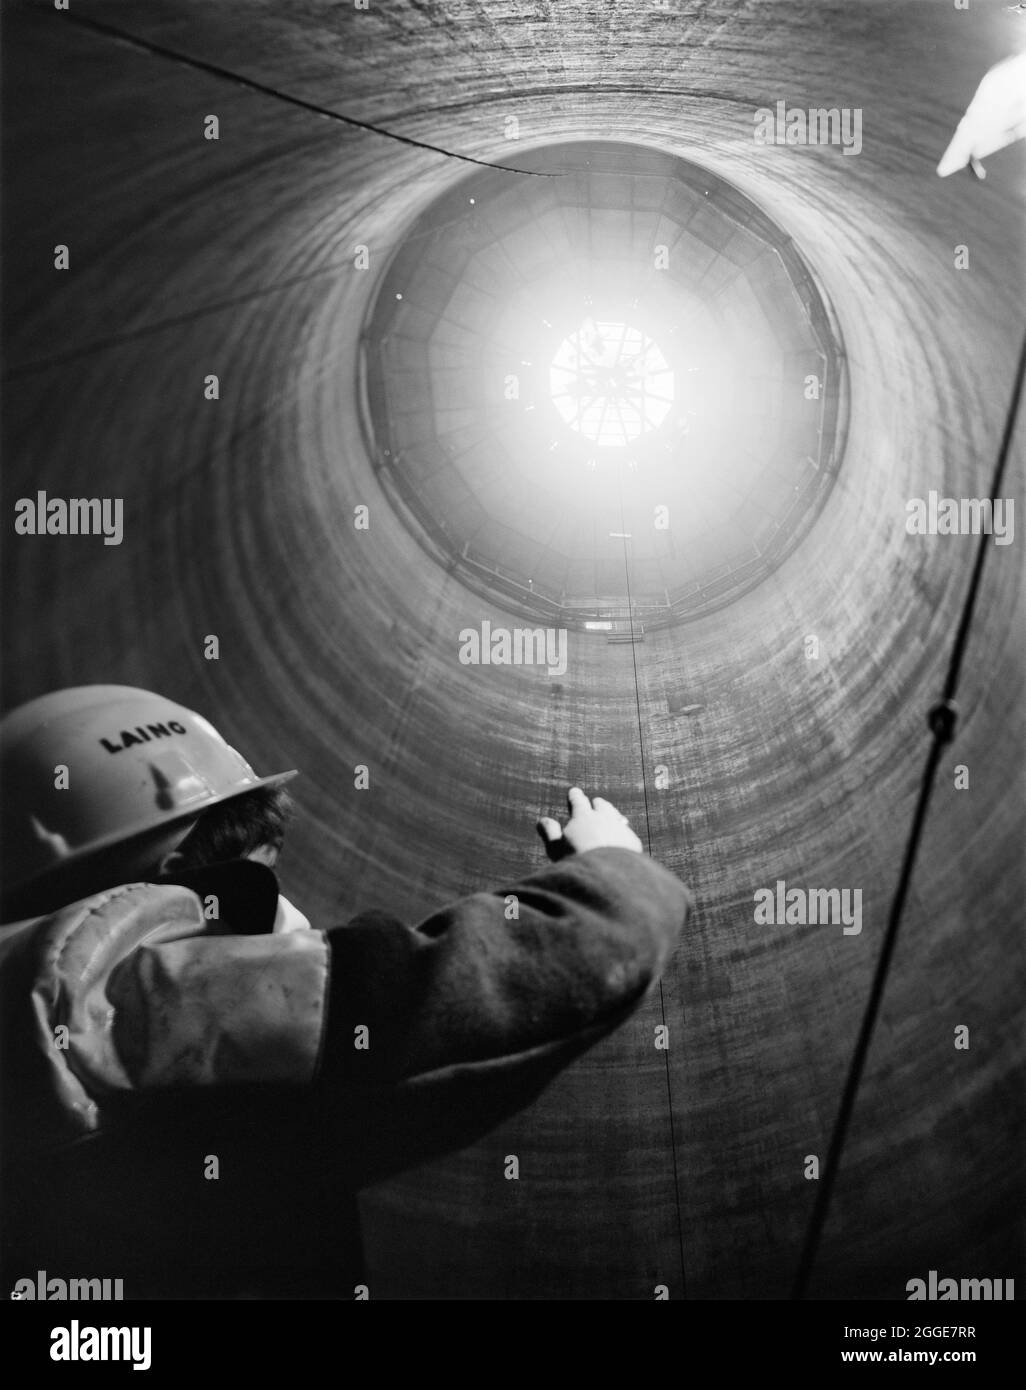 An interior view looking up towards the partially completed conical roof of a sugar silo at Felsted Beet Sugar Factory, with a Laing employee gesturing towards the roof. A sugar factory was built near Felsted in 1926. The first silo to be built by Laing at Felsted Beet Sugar Factory was constructed in 1956 and took three weeks; the second silo was built in six days in 1974. The factory produced sugar until 1981 and the site was then used for storage until 1991. It was later redeveloped for housing. This photograph was published in the April 1974 edition of 'Team Spirit', the Laing newsletter. Stock Photo